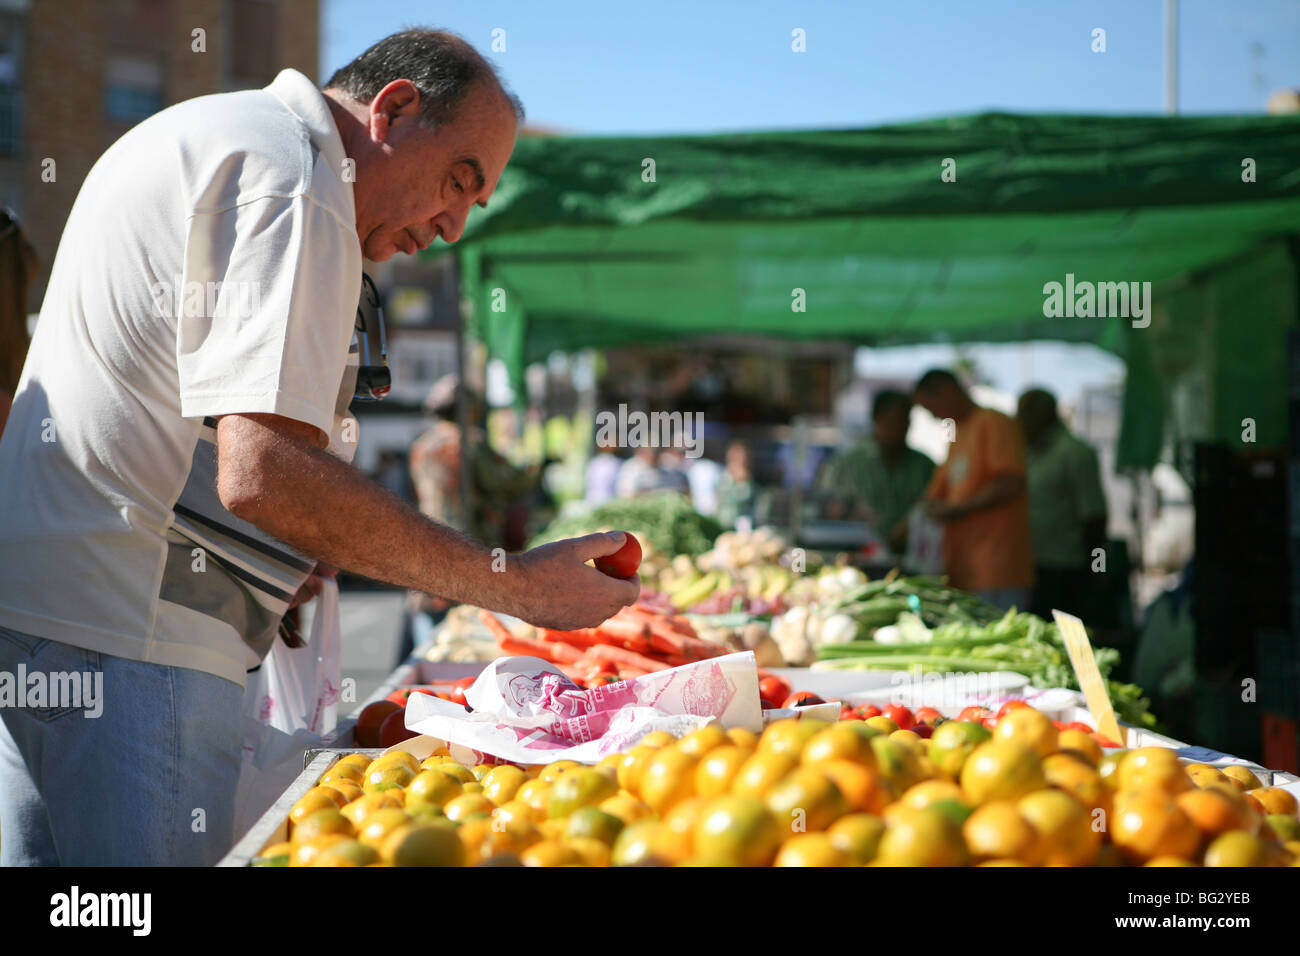 Man choosing tomatoes at a market stall in southern Spain Stock Photo